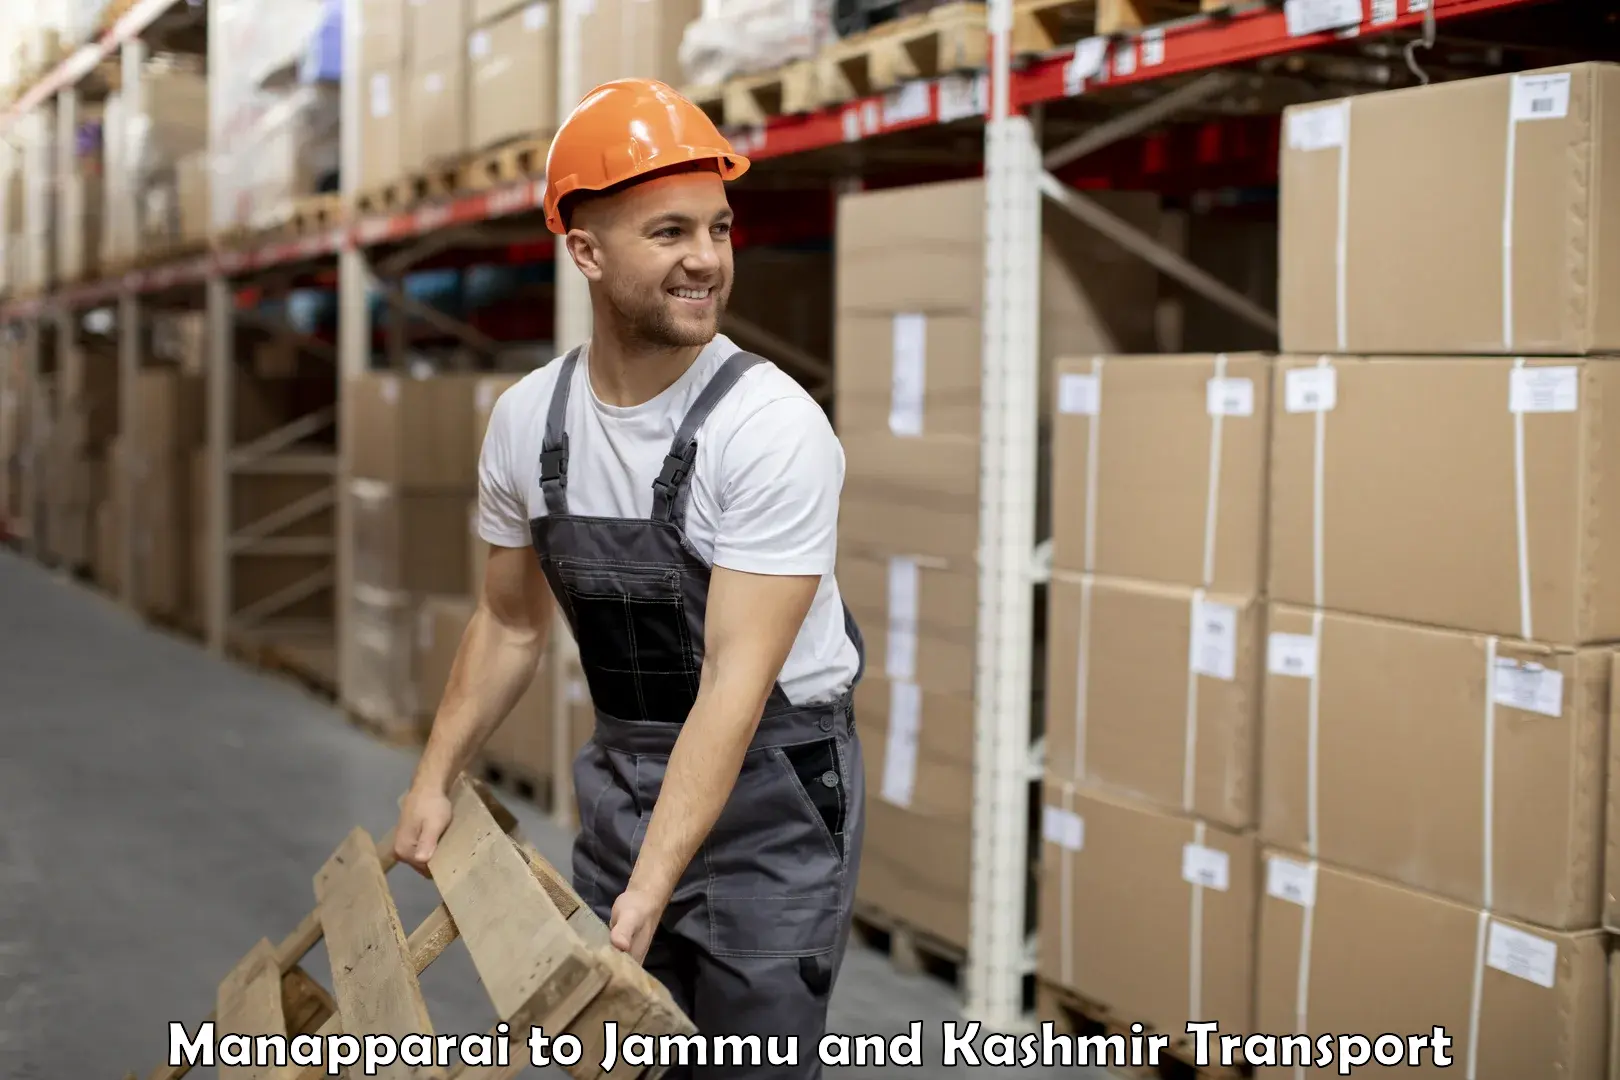 Express transport services in Manapparai to Jammu and Kashmir